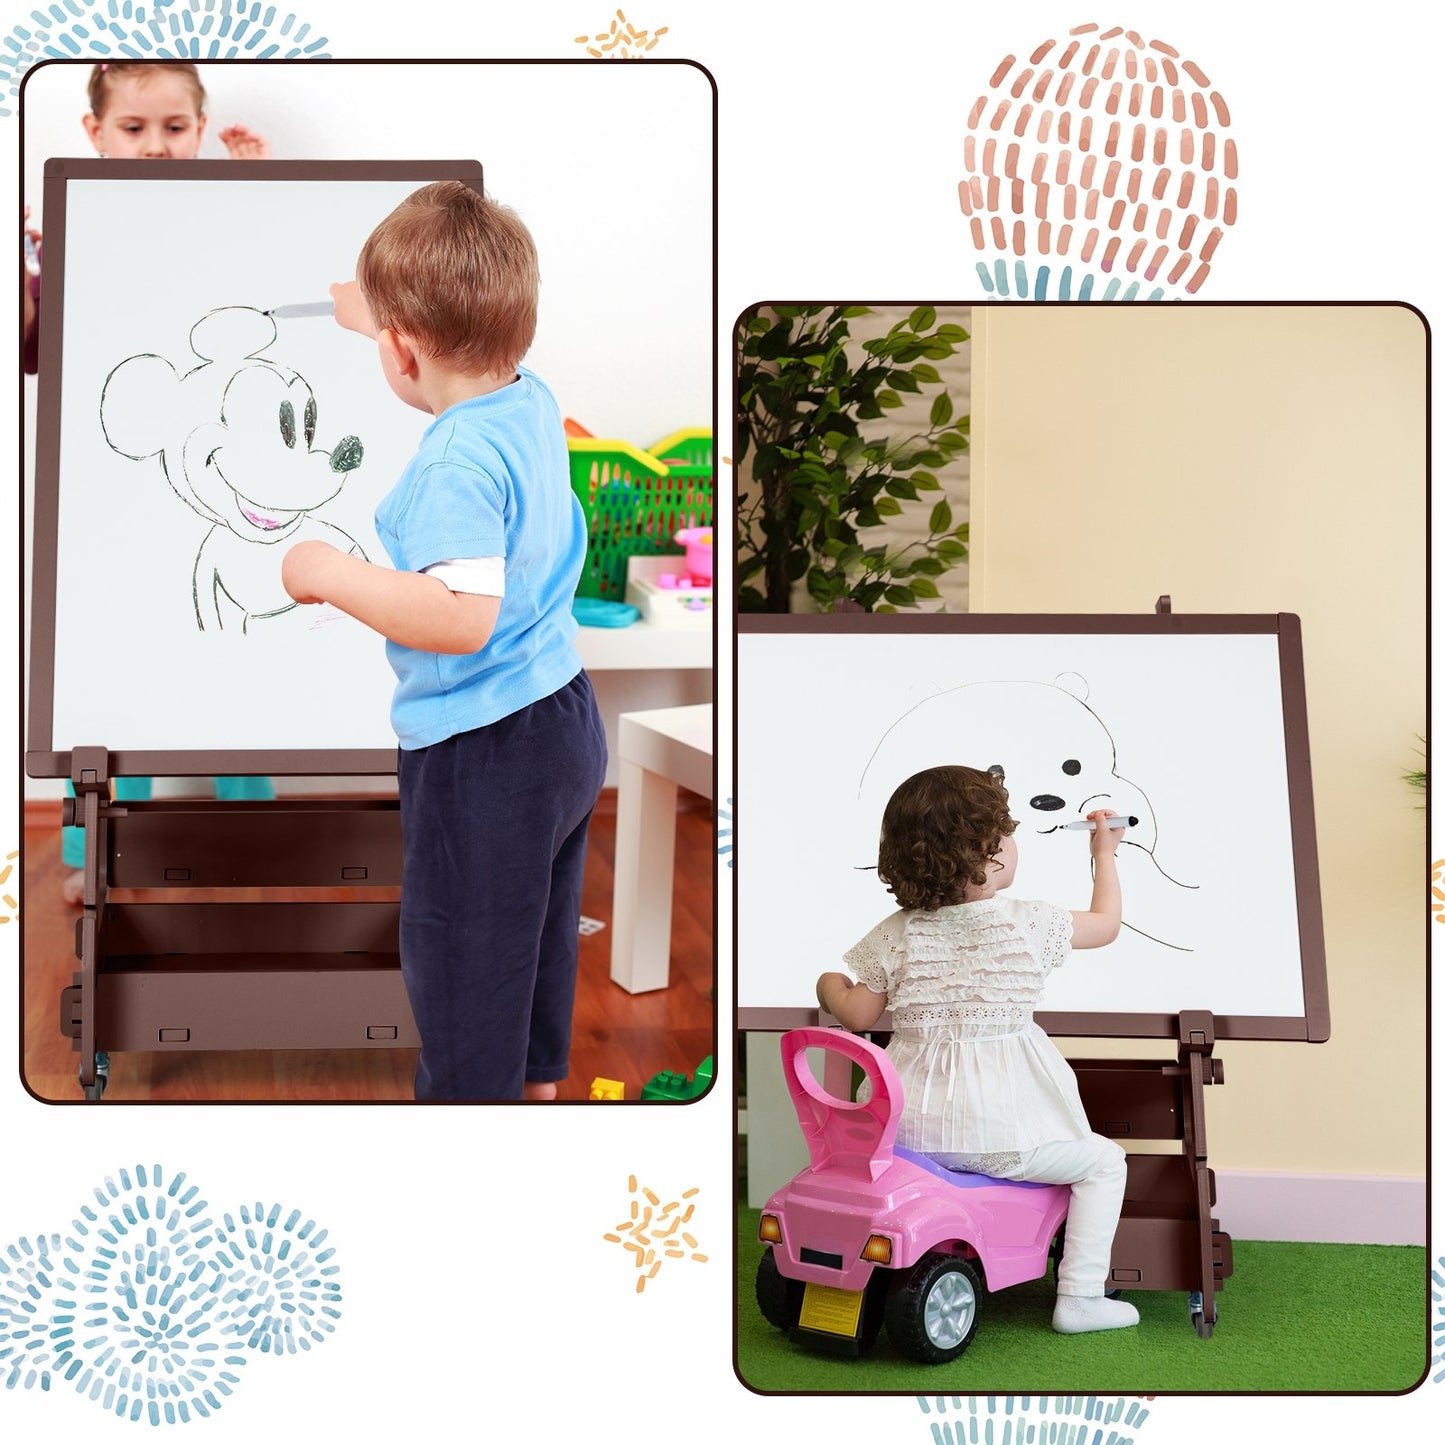 Multifunctional Kids' Standing Art Easel with Dry-Erase Board, Brown